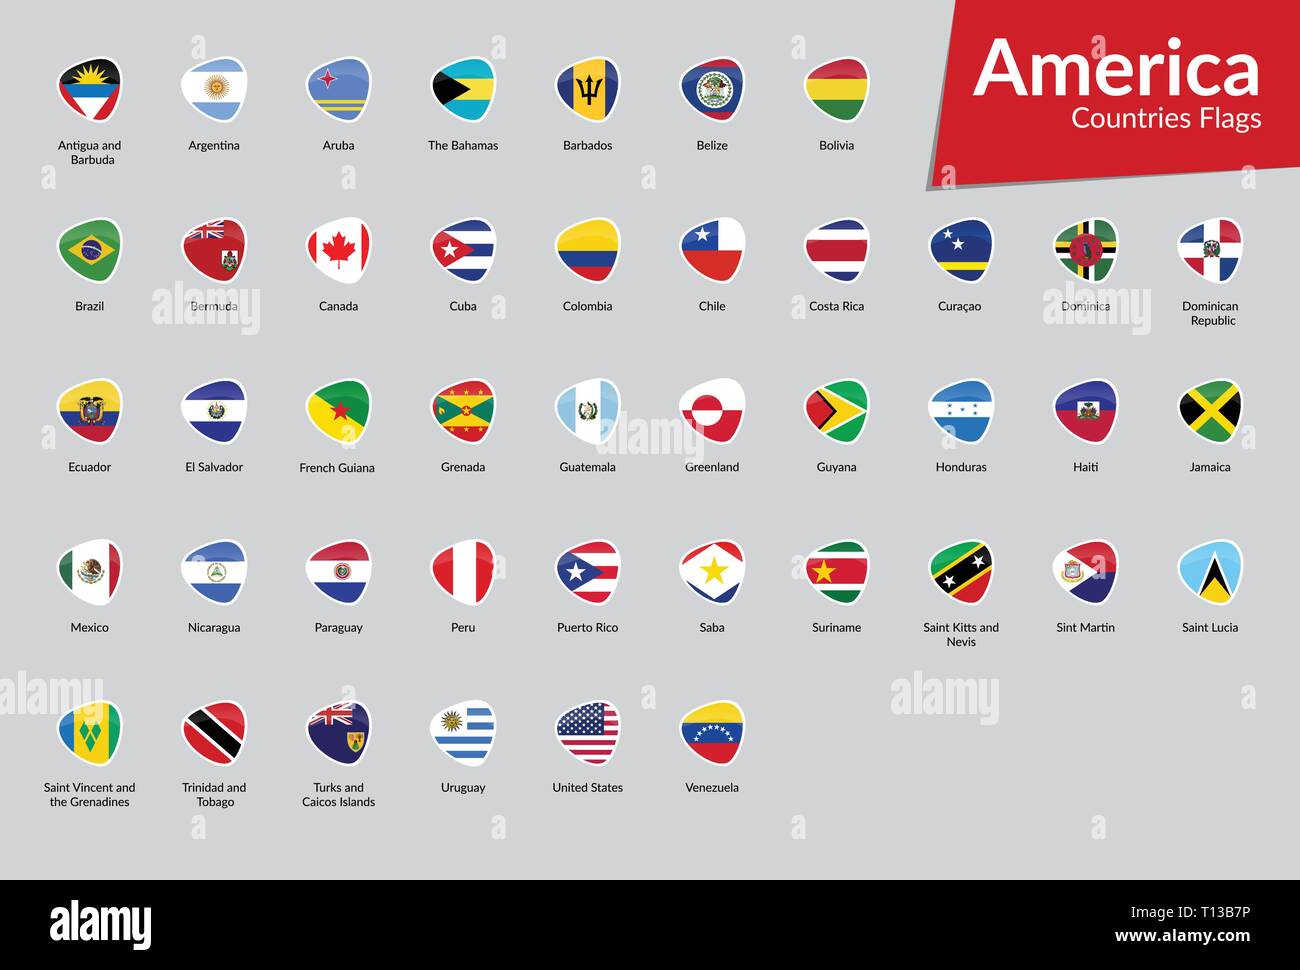 American Continent Countries Flags vector icon collection Stock Vector